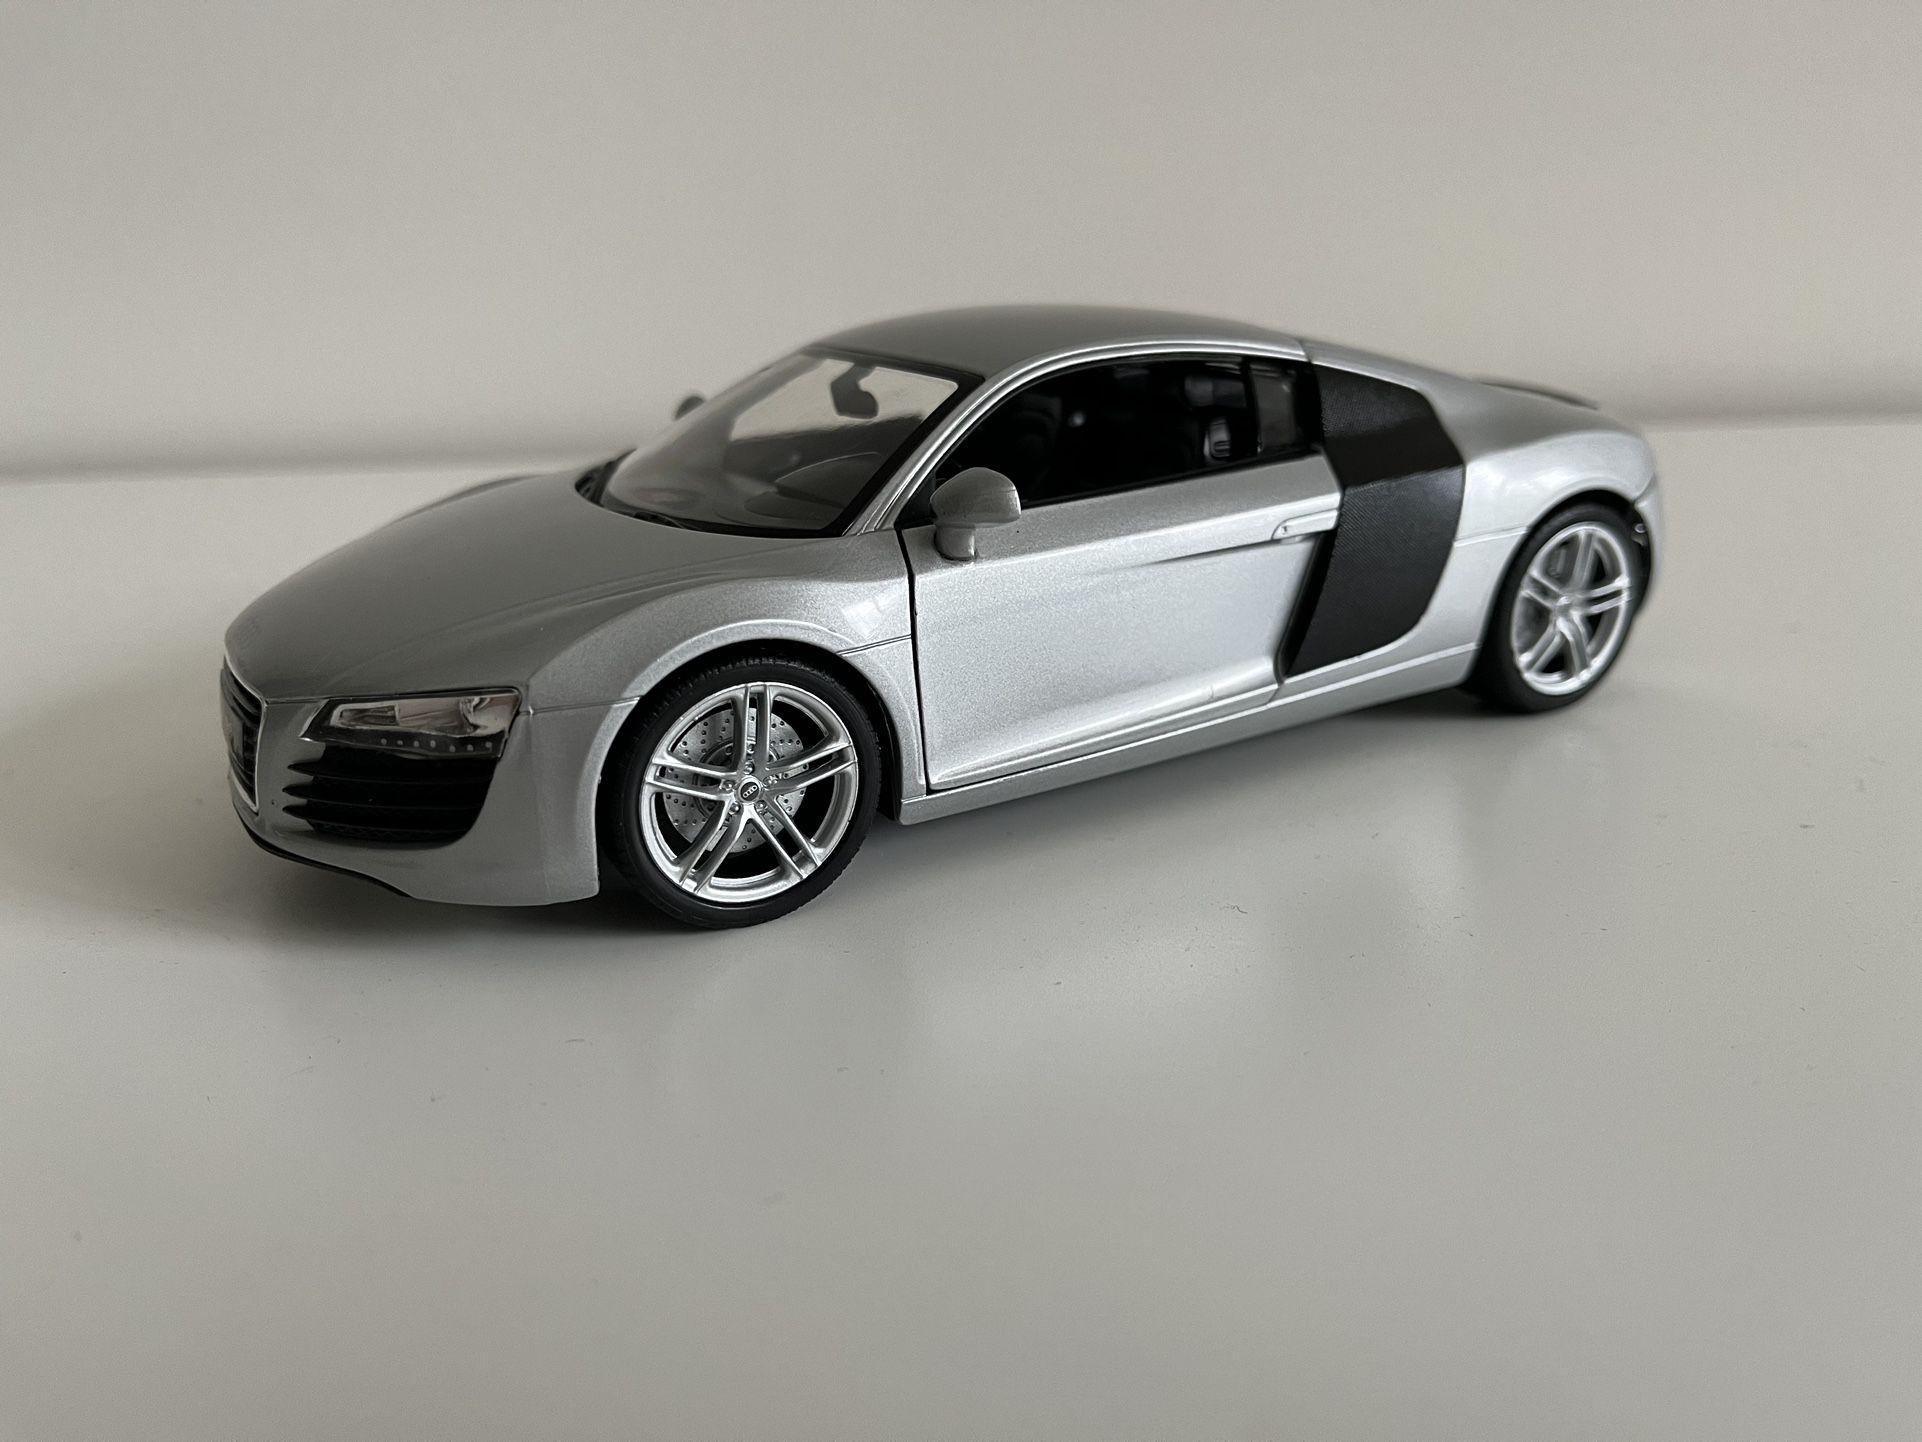 WELLY Audi R8 (Toy Car/Collectiable)